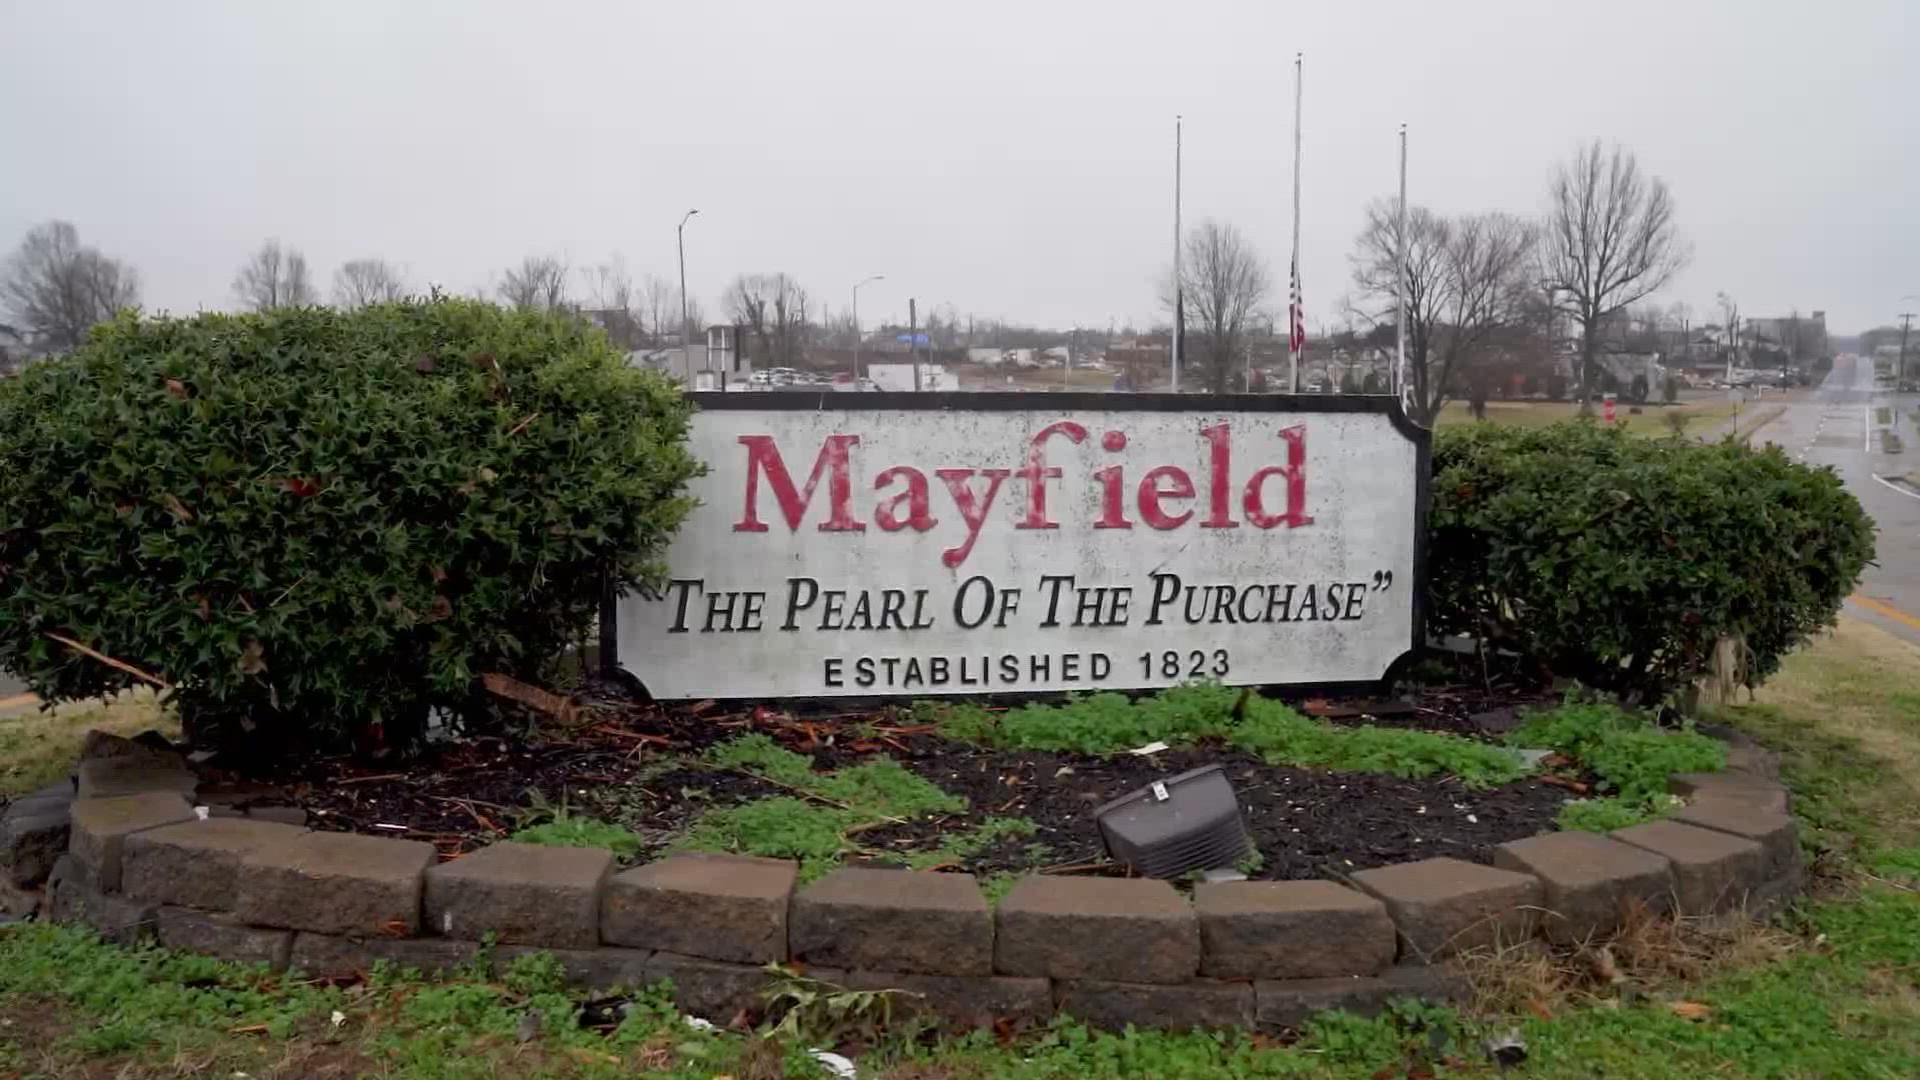 Video of tornado ravaged Mayfield on Friday, December 17-- a week after the tornadoes hit.